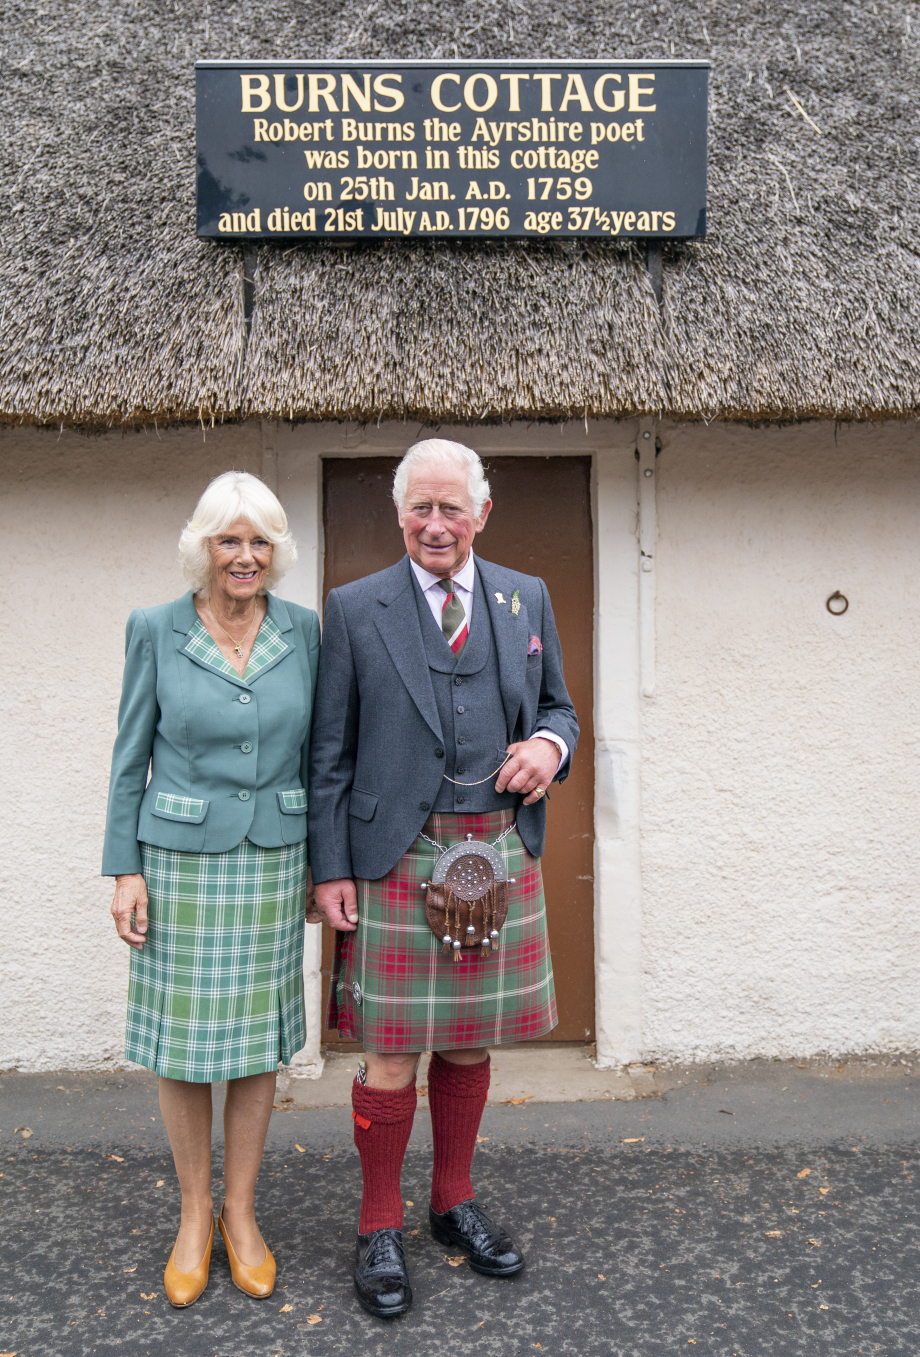 The King and Queen visit Burns Cottage